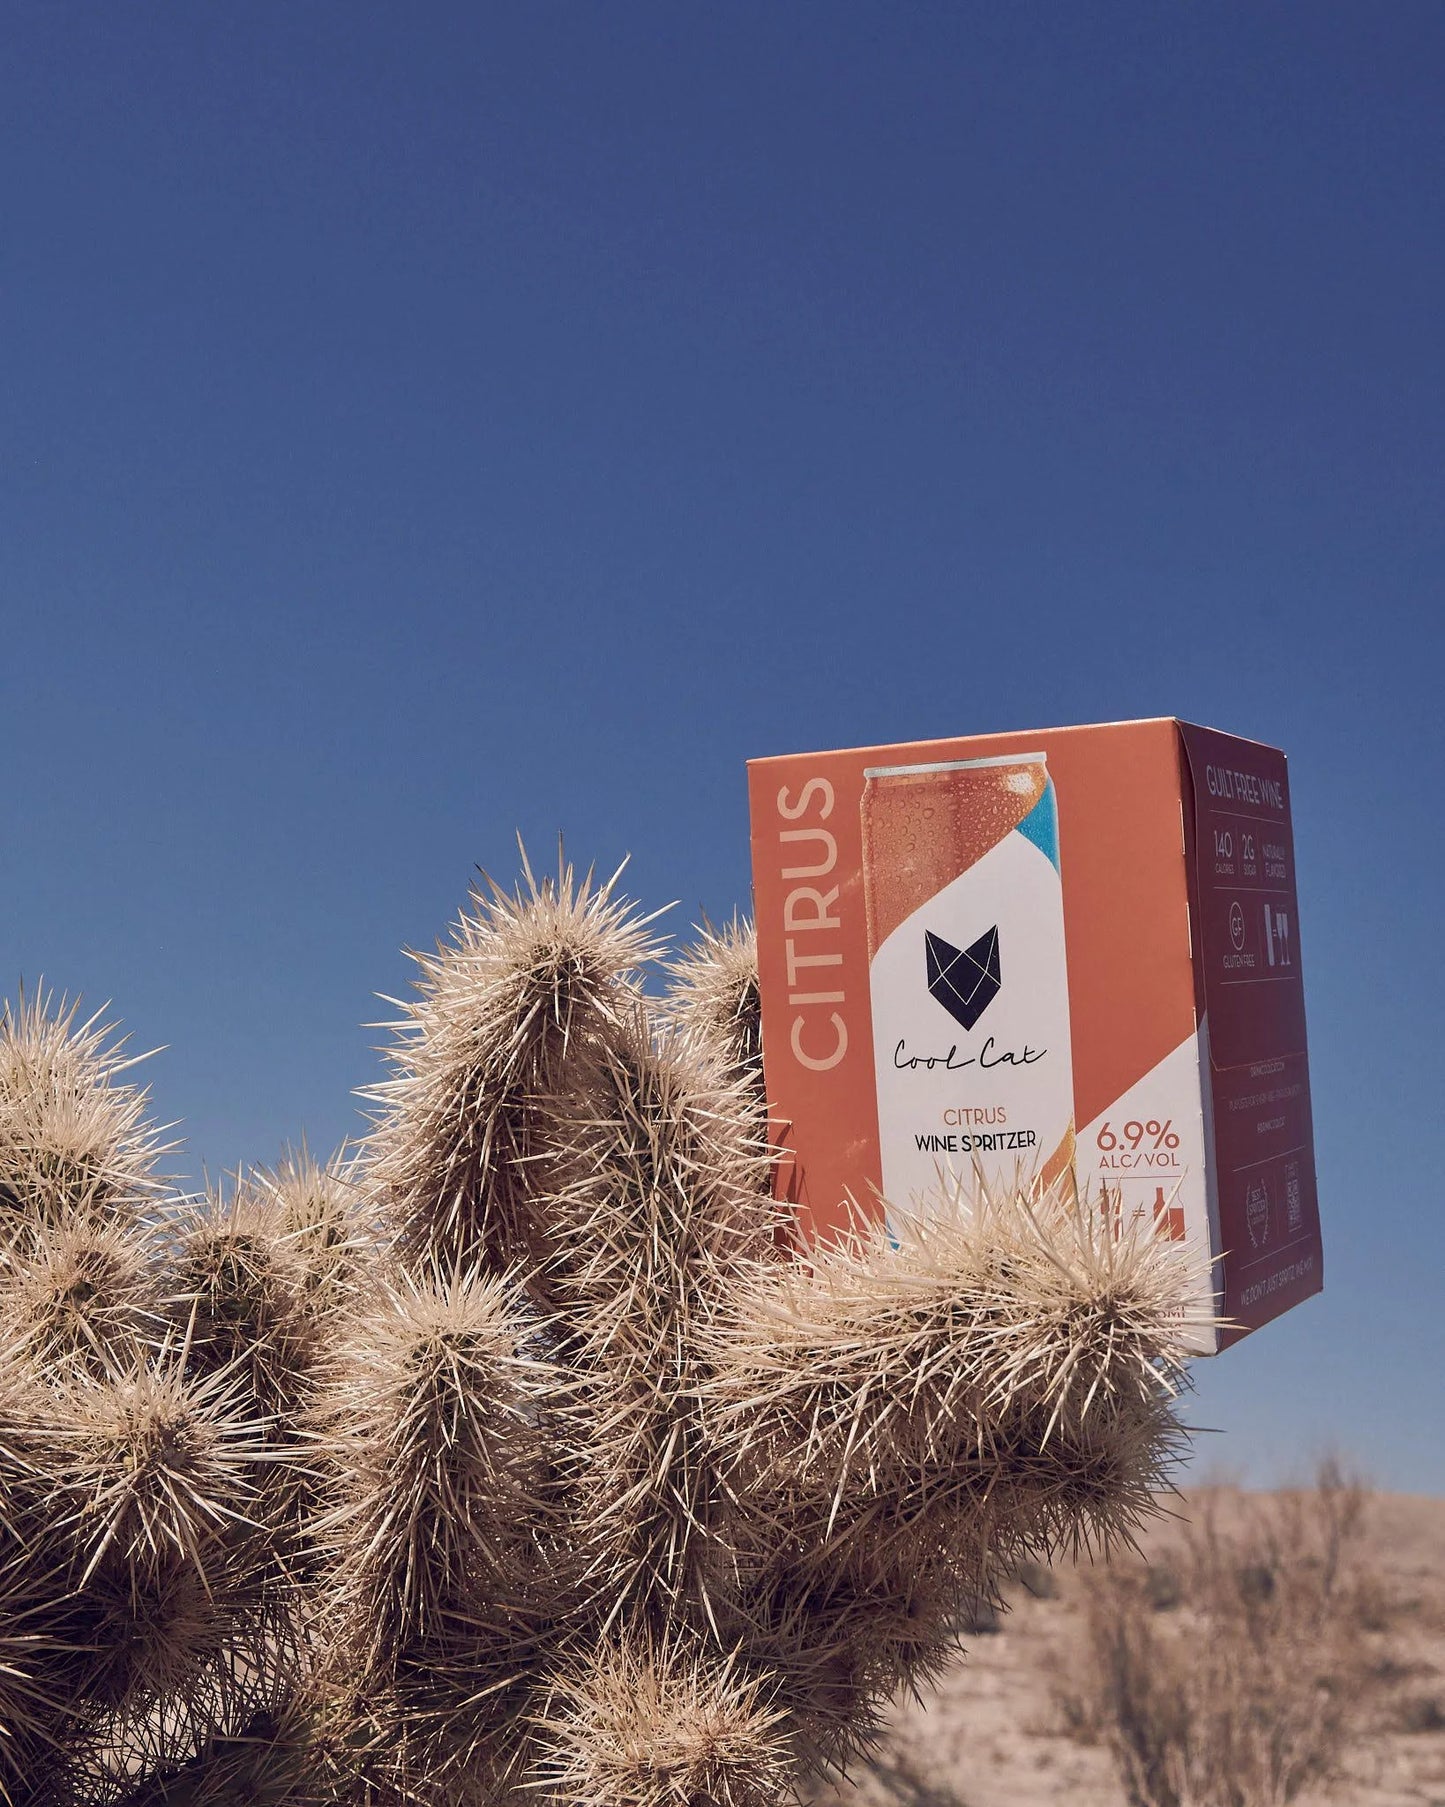 A 4-pack of Cool Cat Citrus Sparkling Cocktail in the desert.